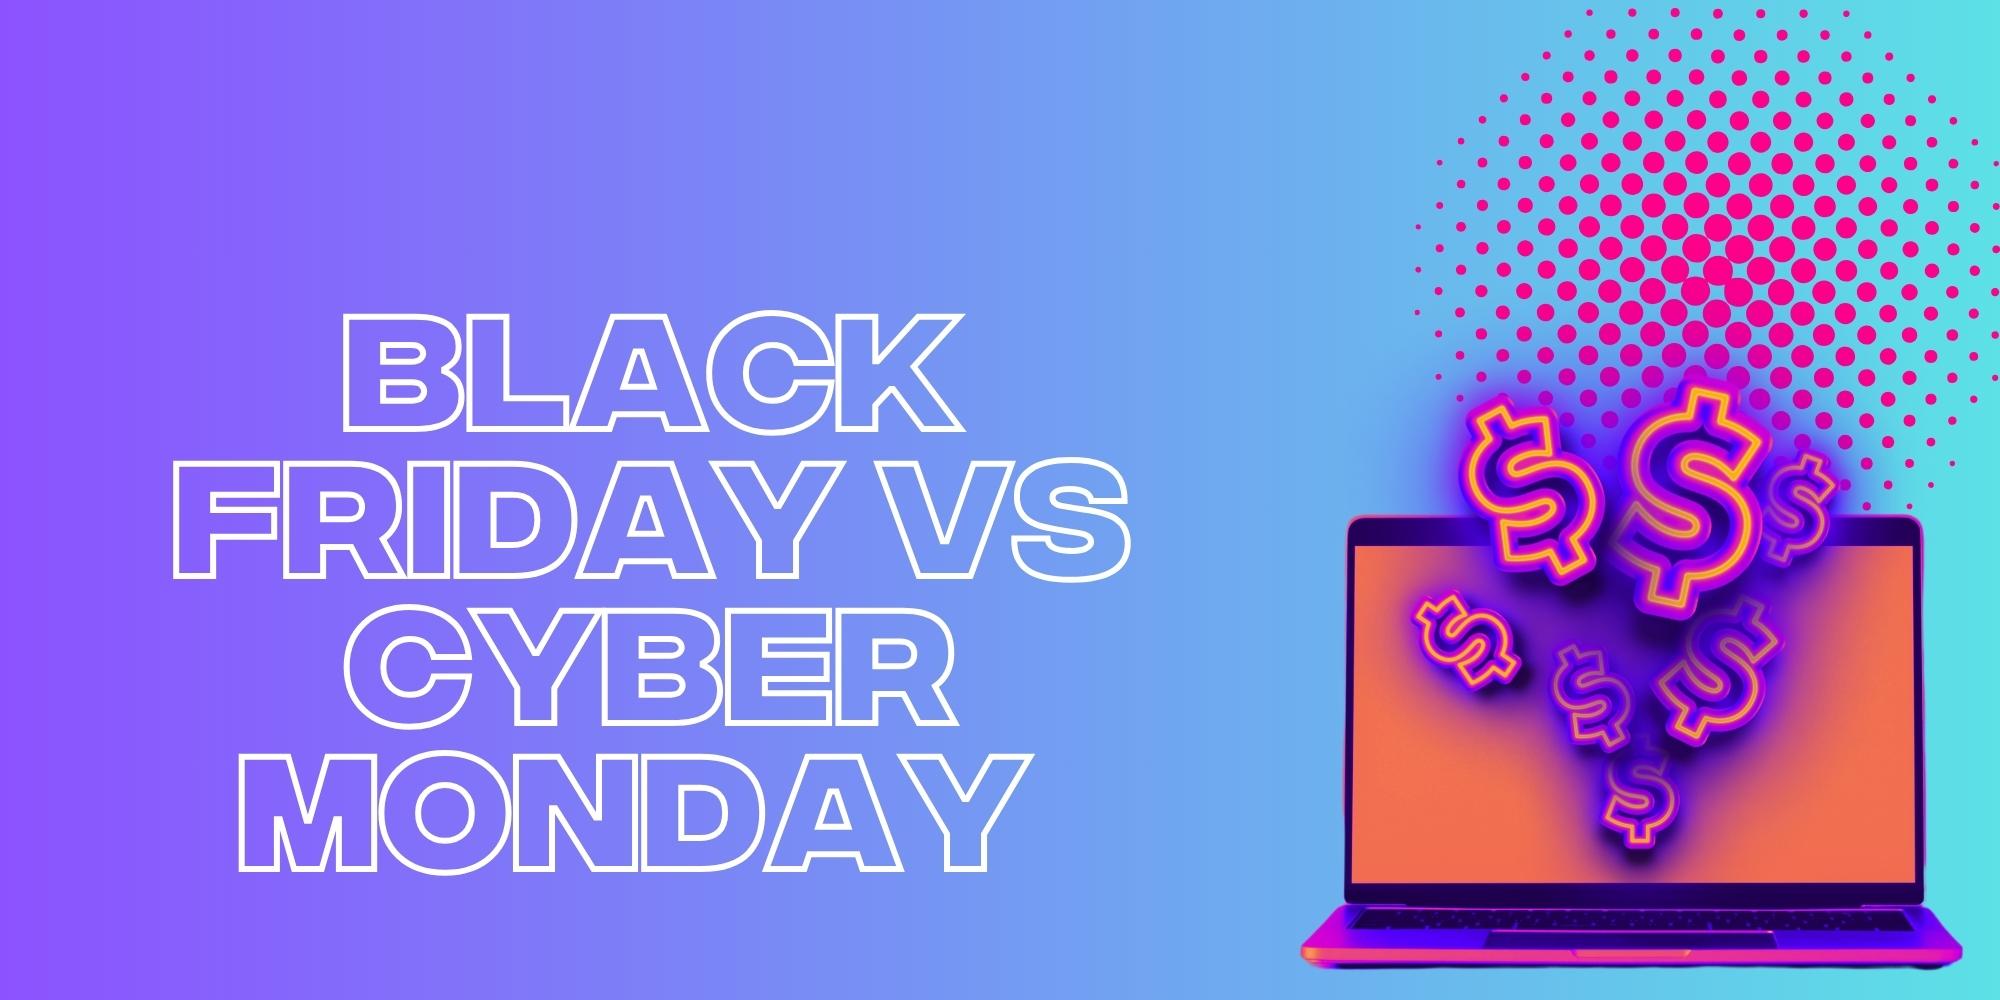 Black Friday vs. Cyber Monday: What’s The Difference?